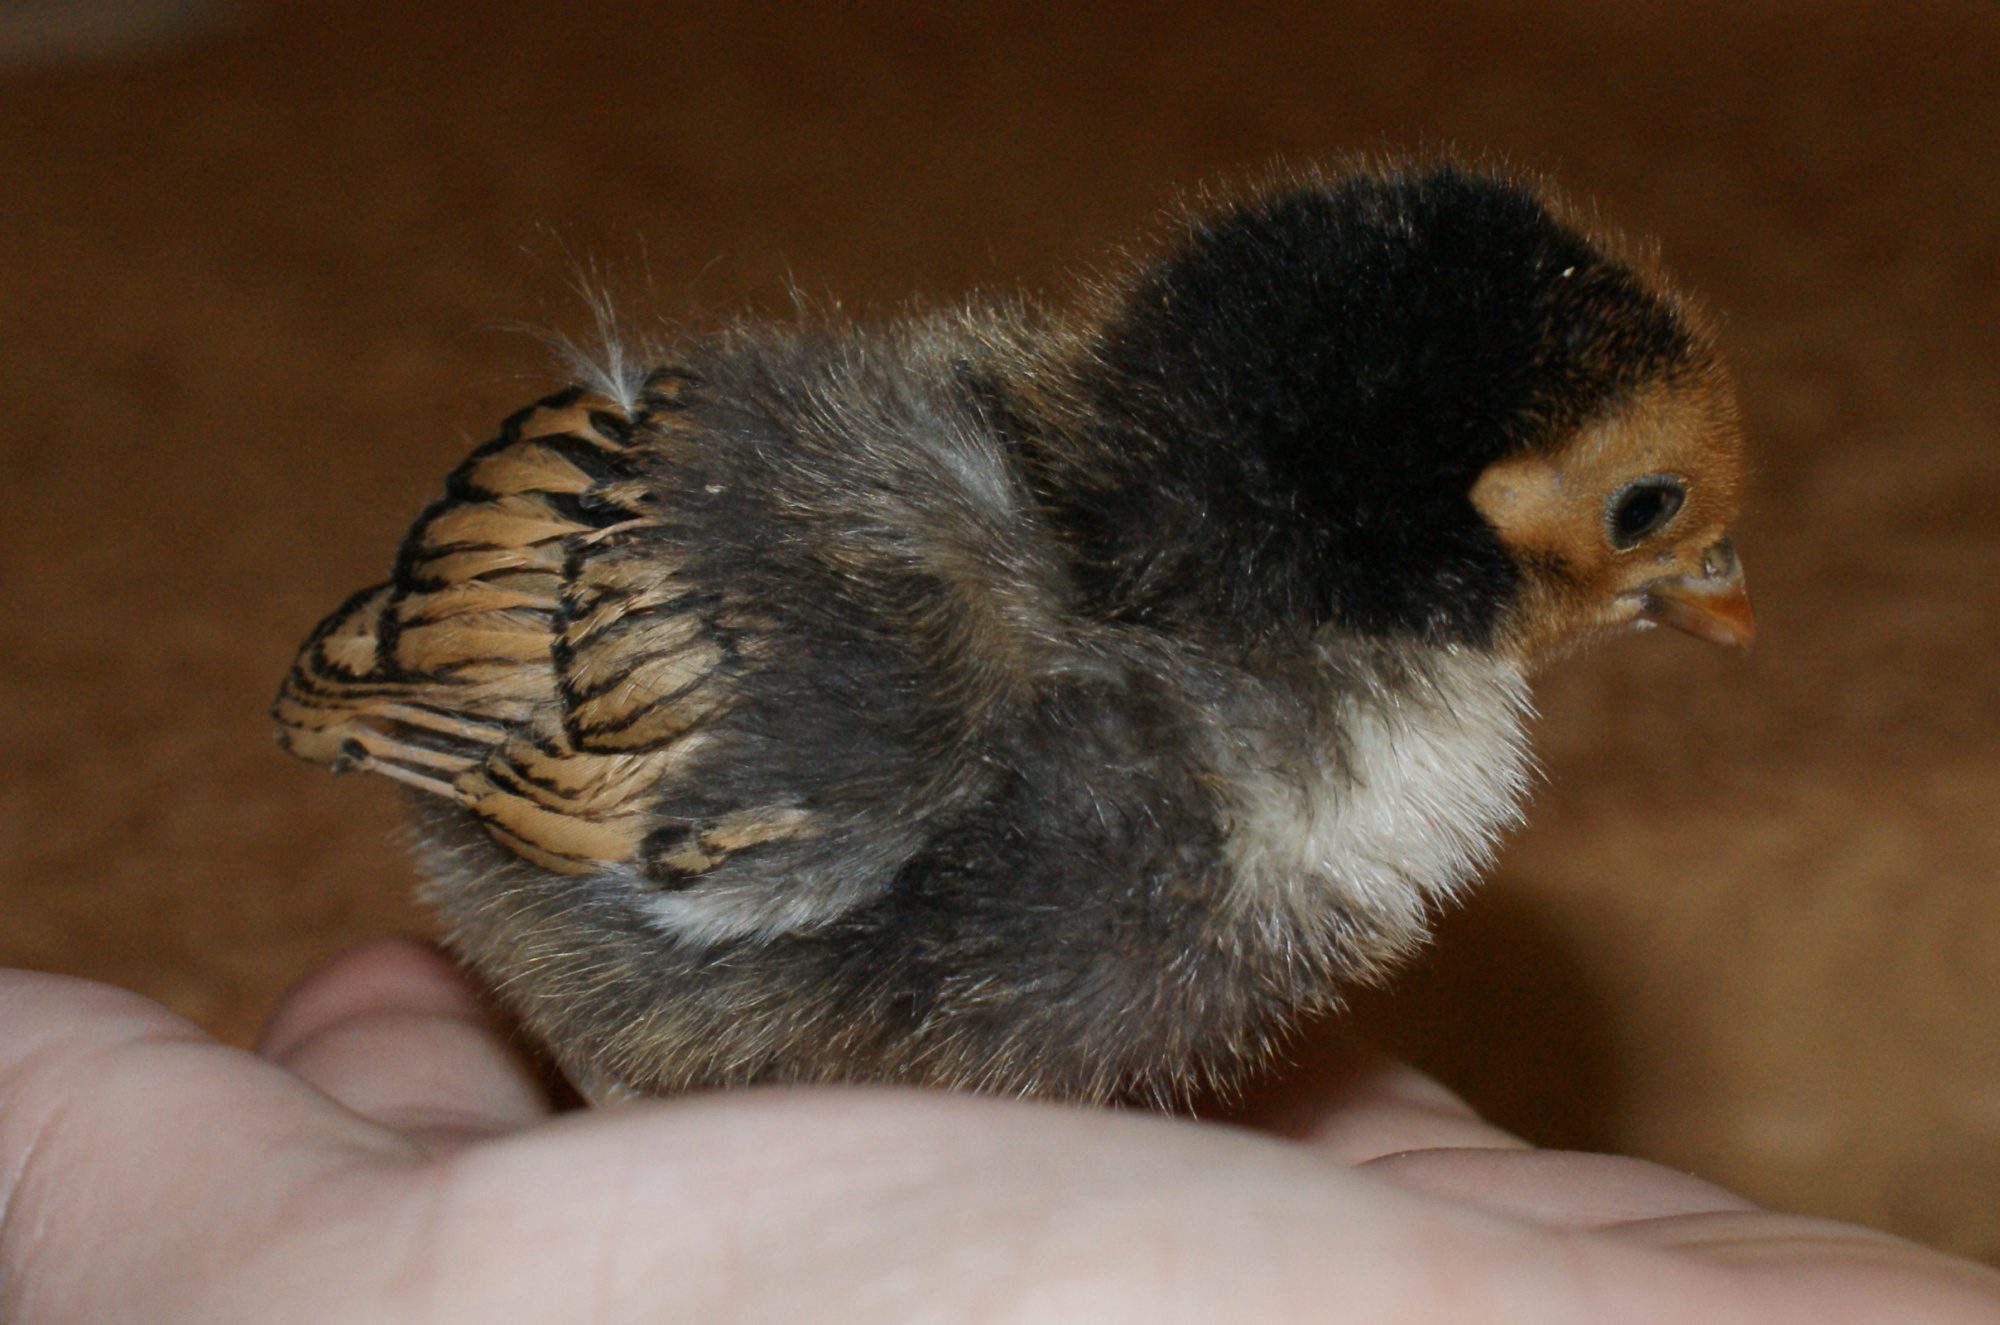 Our adorable little golden seabright bantam chick turned out to be the most beautiful bird of the group.  When we got her she was completely gray with a little touch of orange on top of her head.